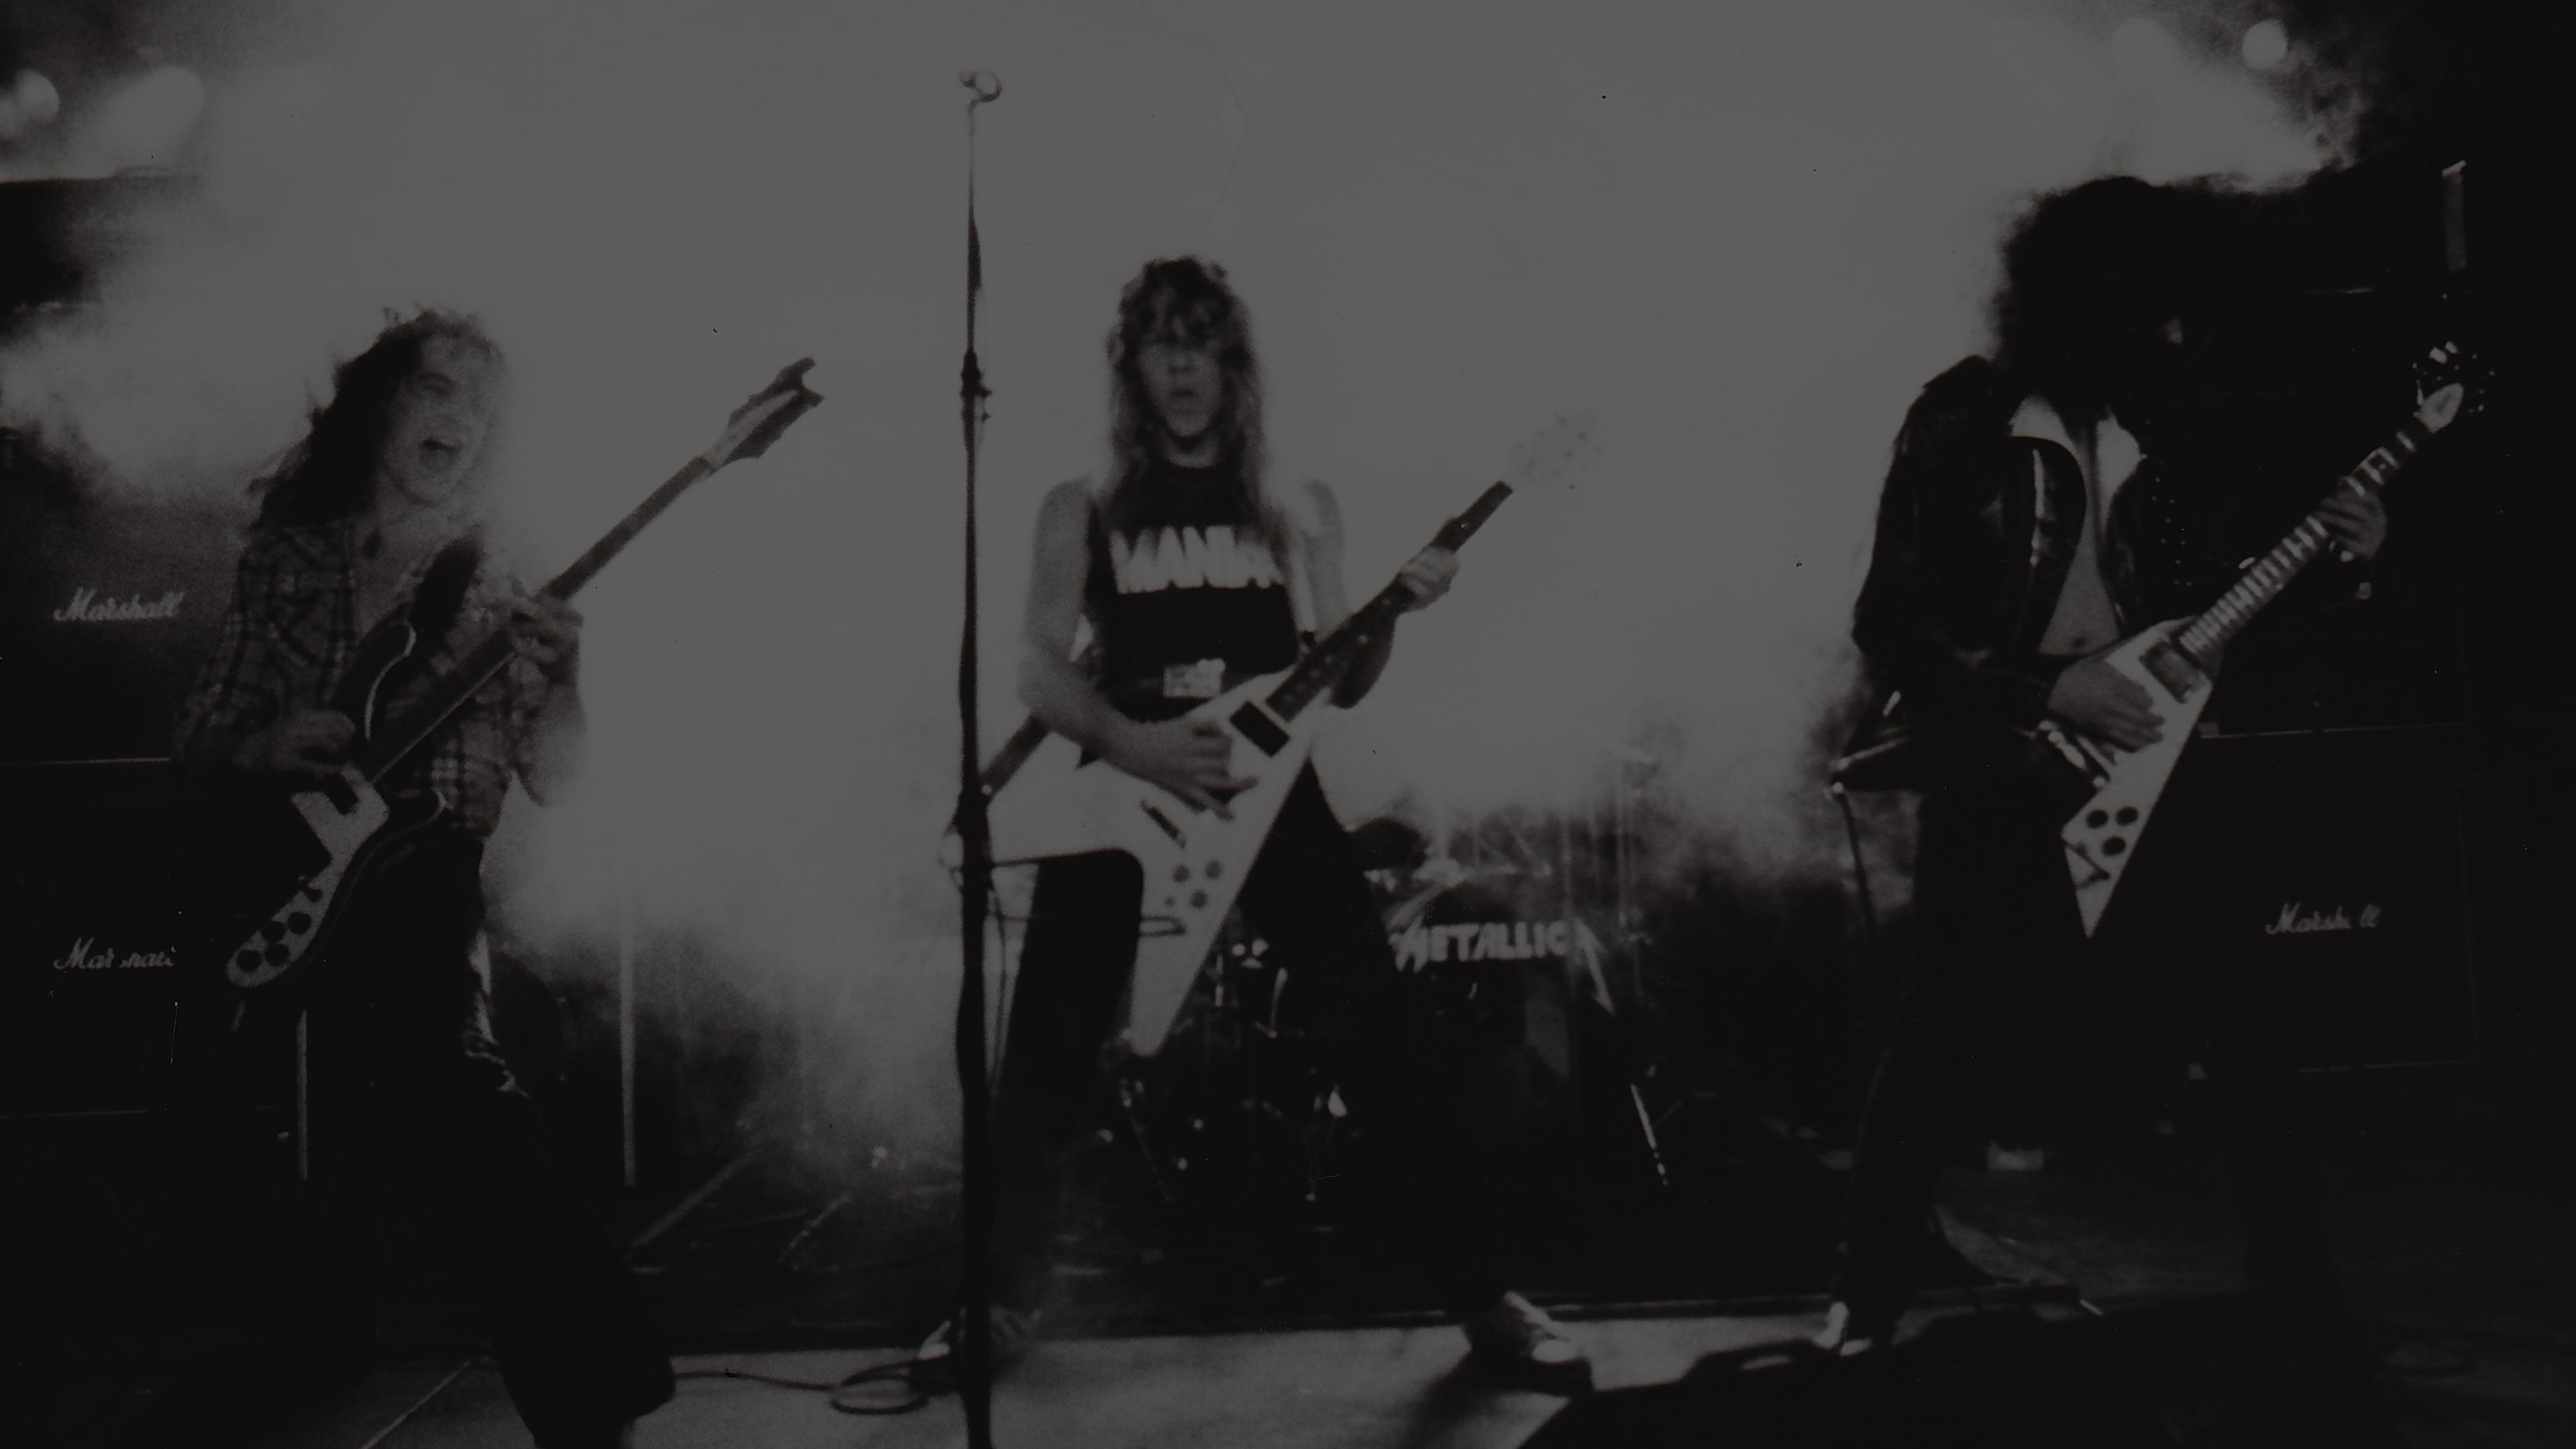 Metallica at The Stone in San Francisco, CA on November 7, 1983